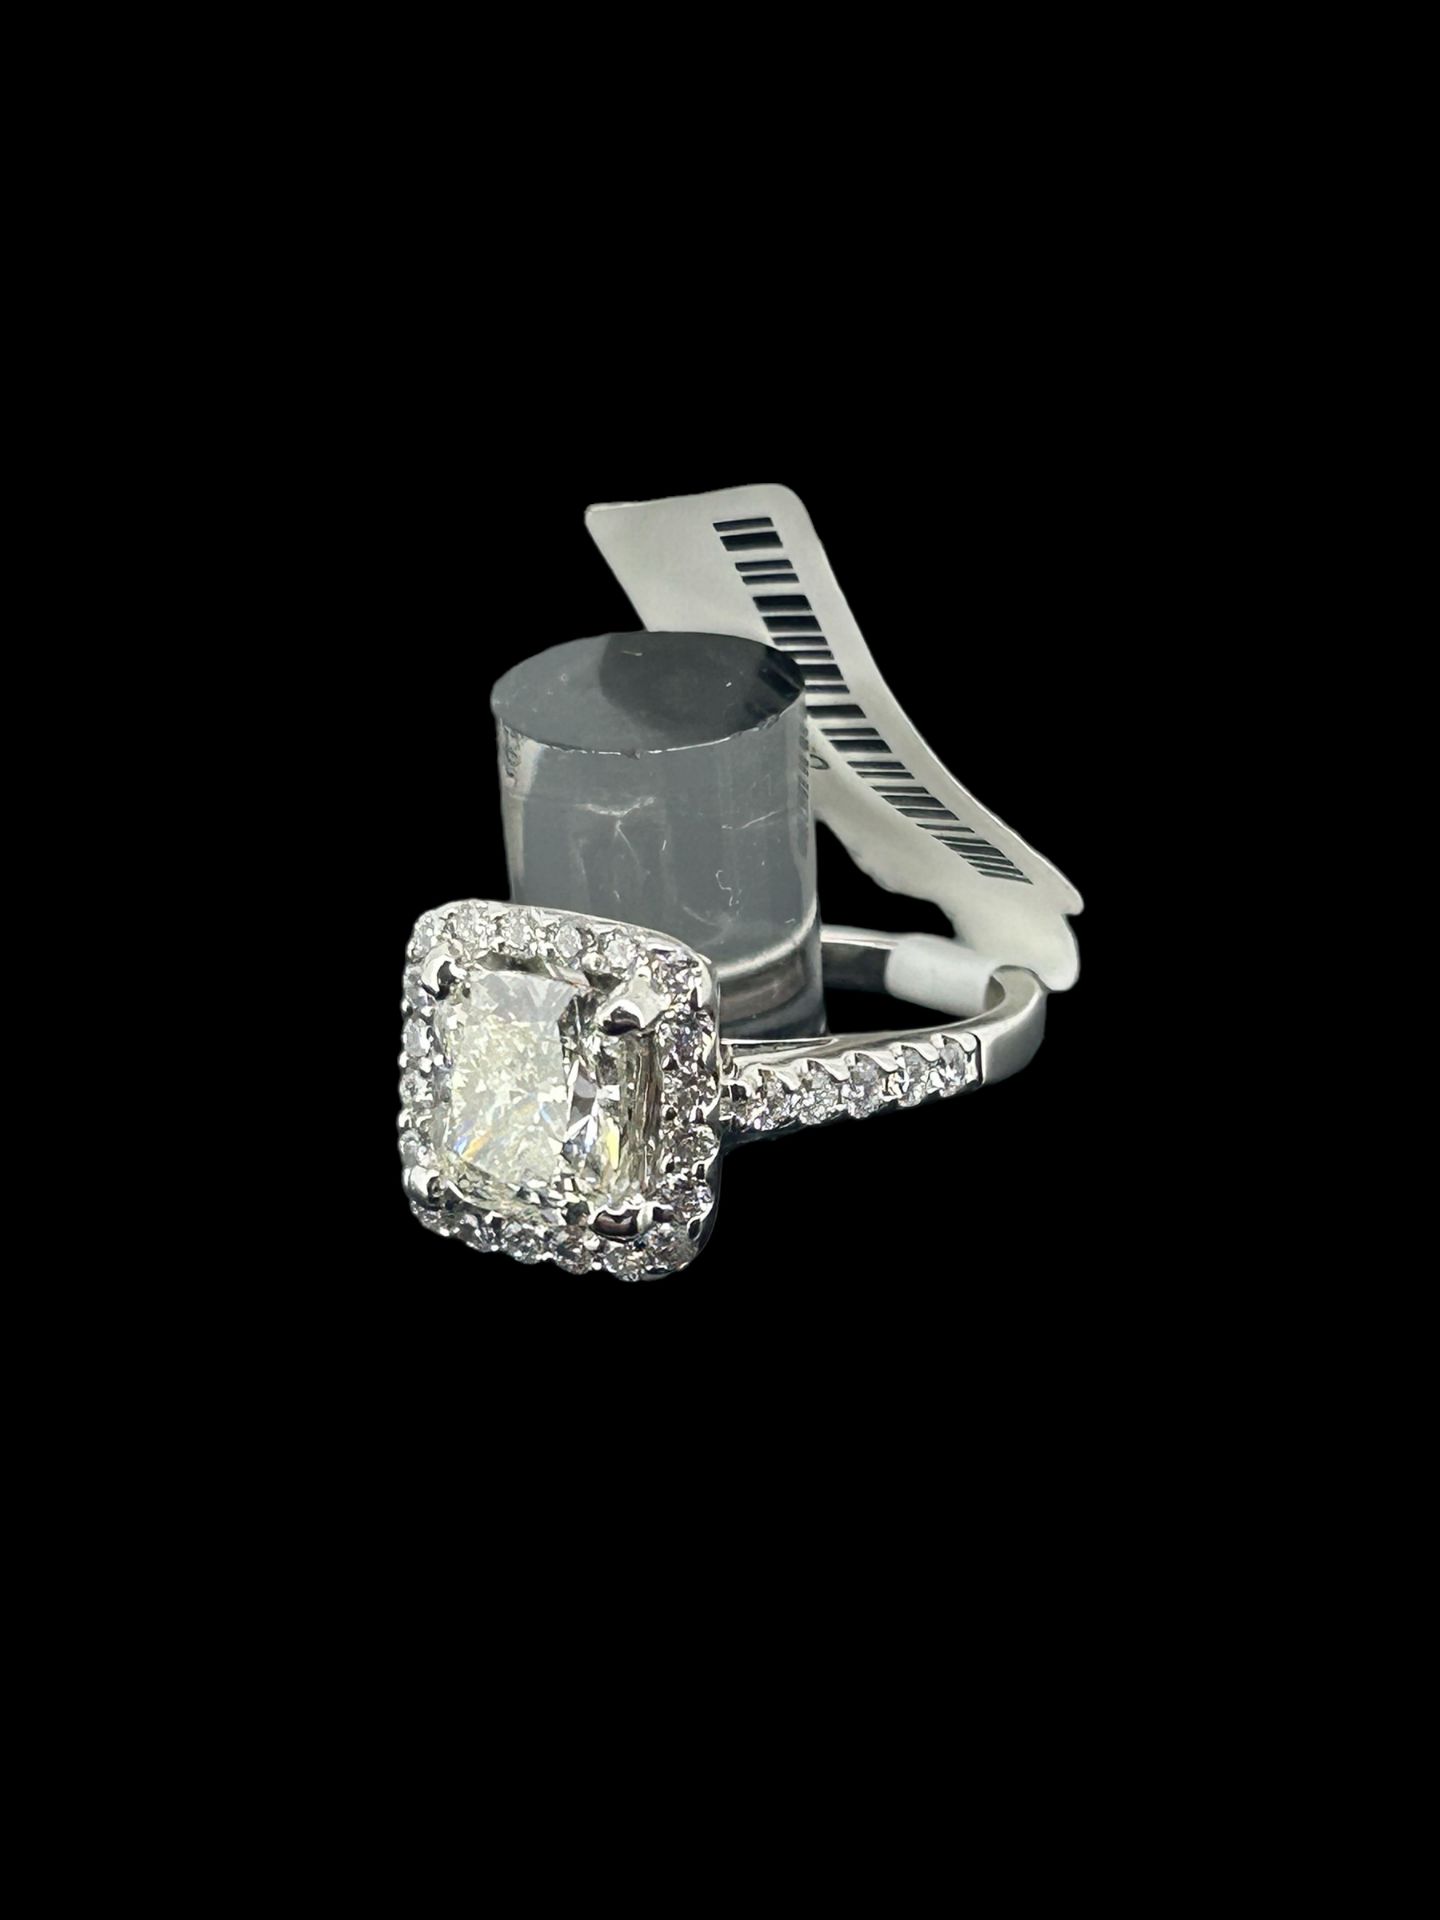 14k white gold ring set with 2.03 carat cushion cut stone and 0.65 diamonds in the shank - Image 2 of 2